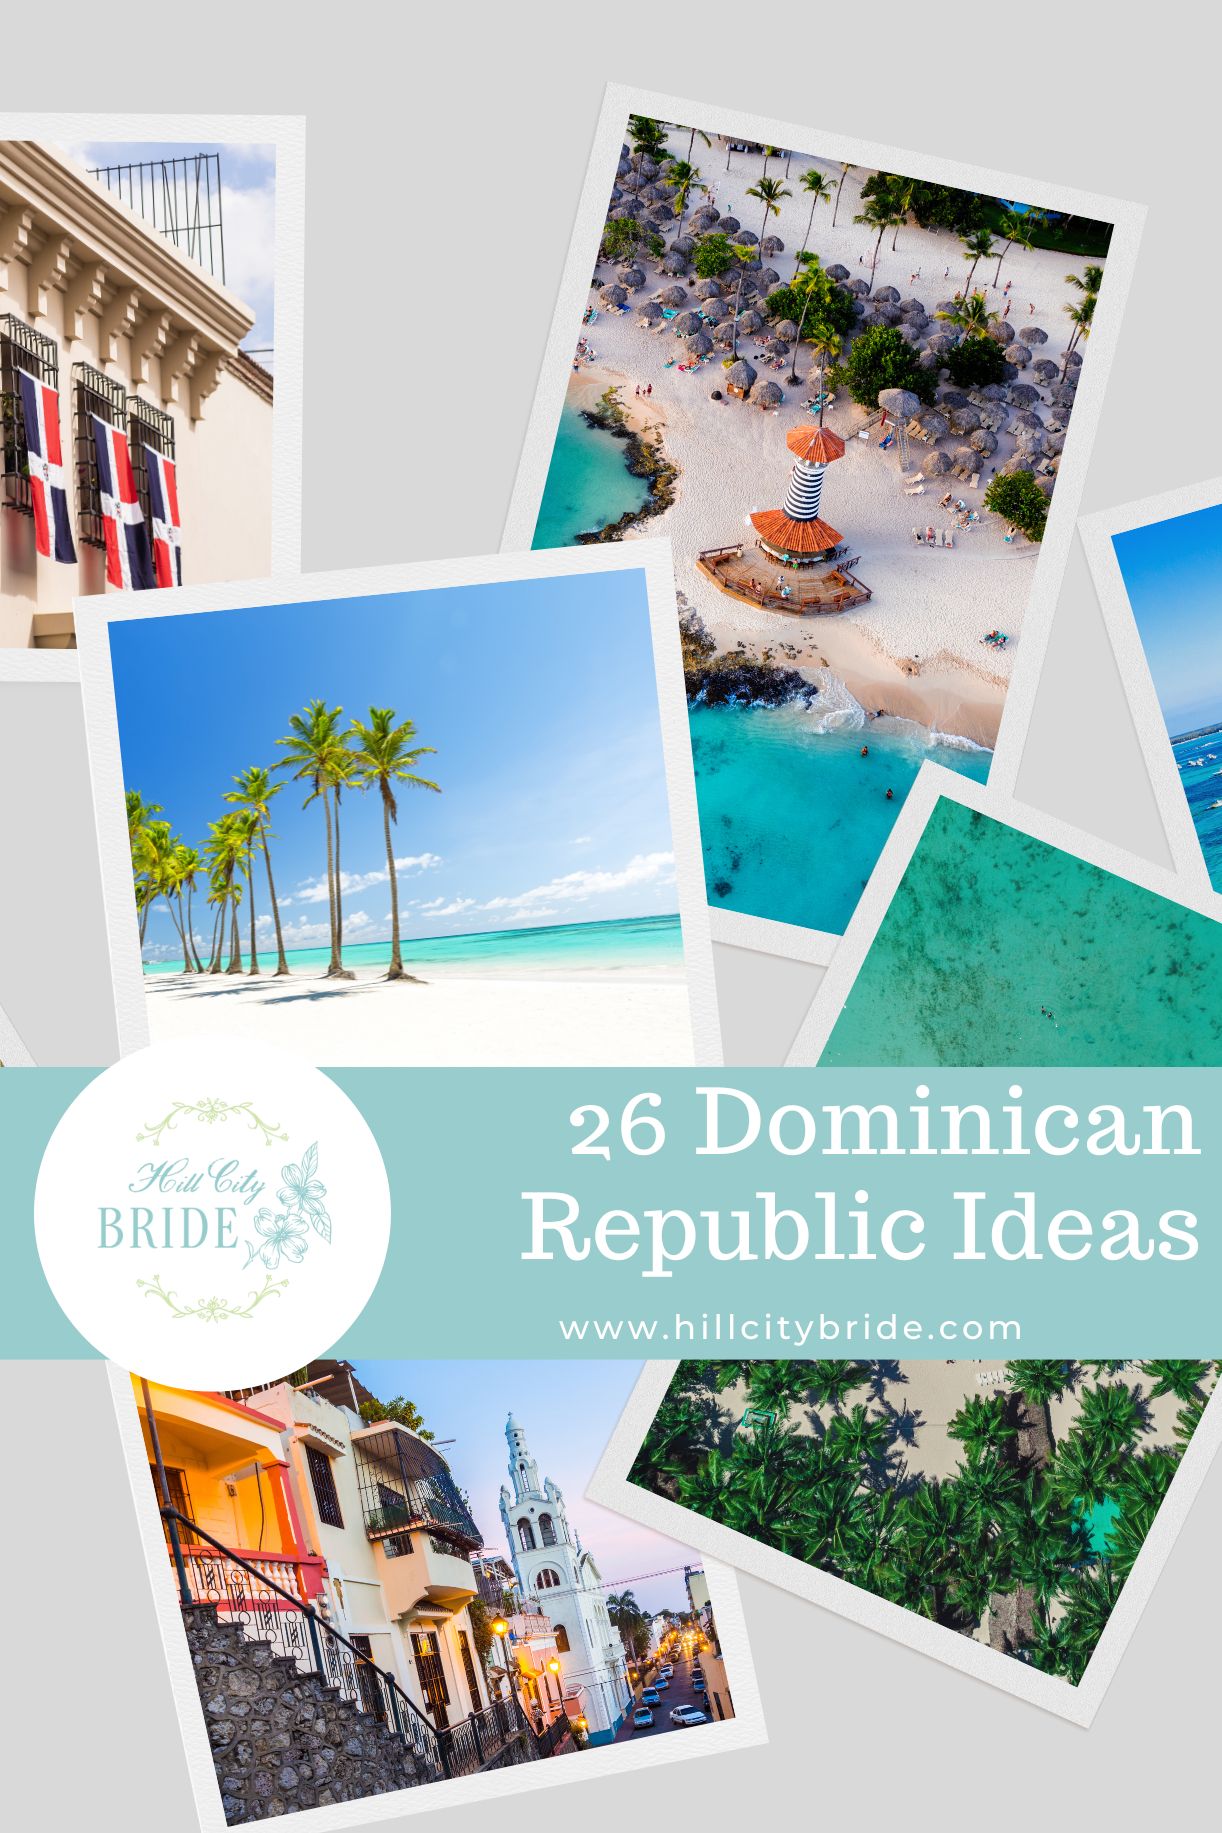 Things to Do on a Dominican Republic Honeymoon